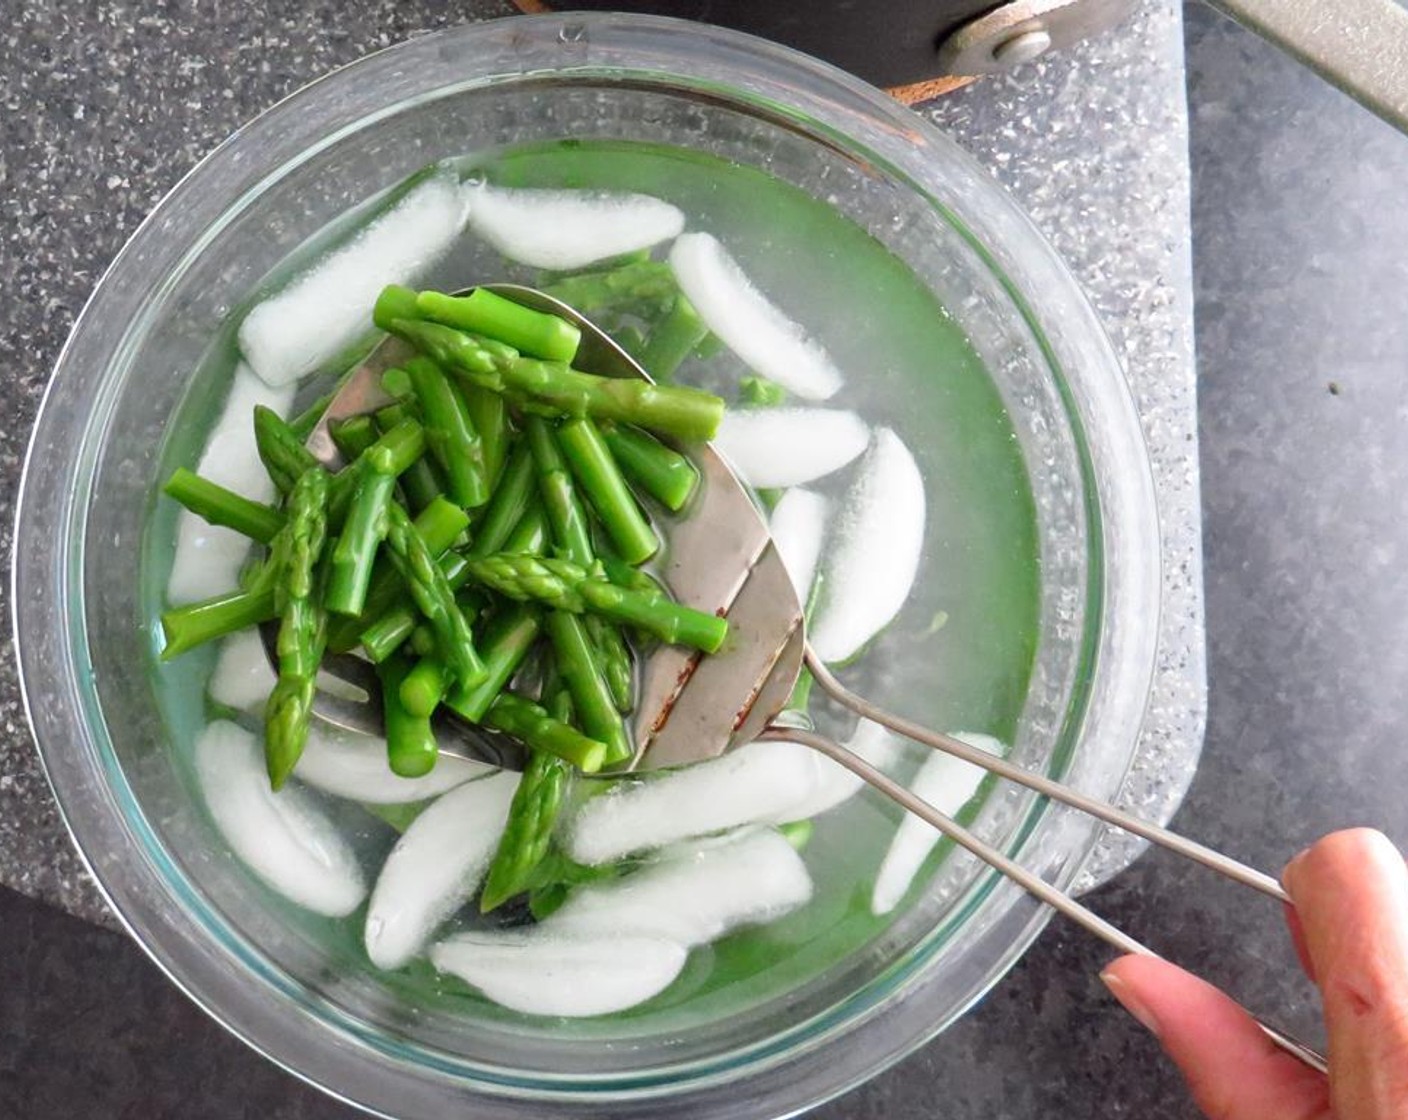 step 4 Using a slotted spoon, scoop out the asparagus and plunge into ice bath to stop the cooking and set color. Remove asparagus and pat dry with a paper towel.